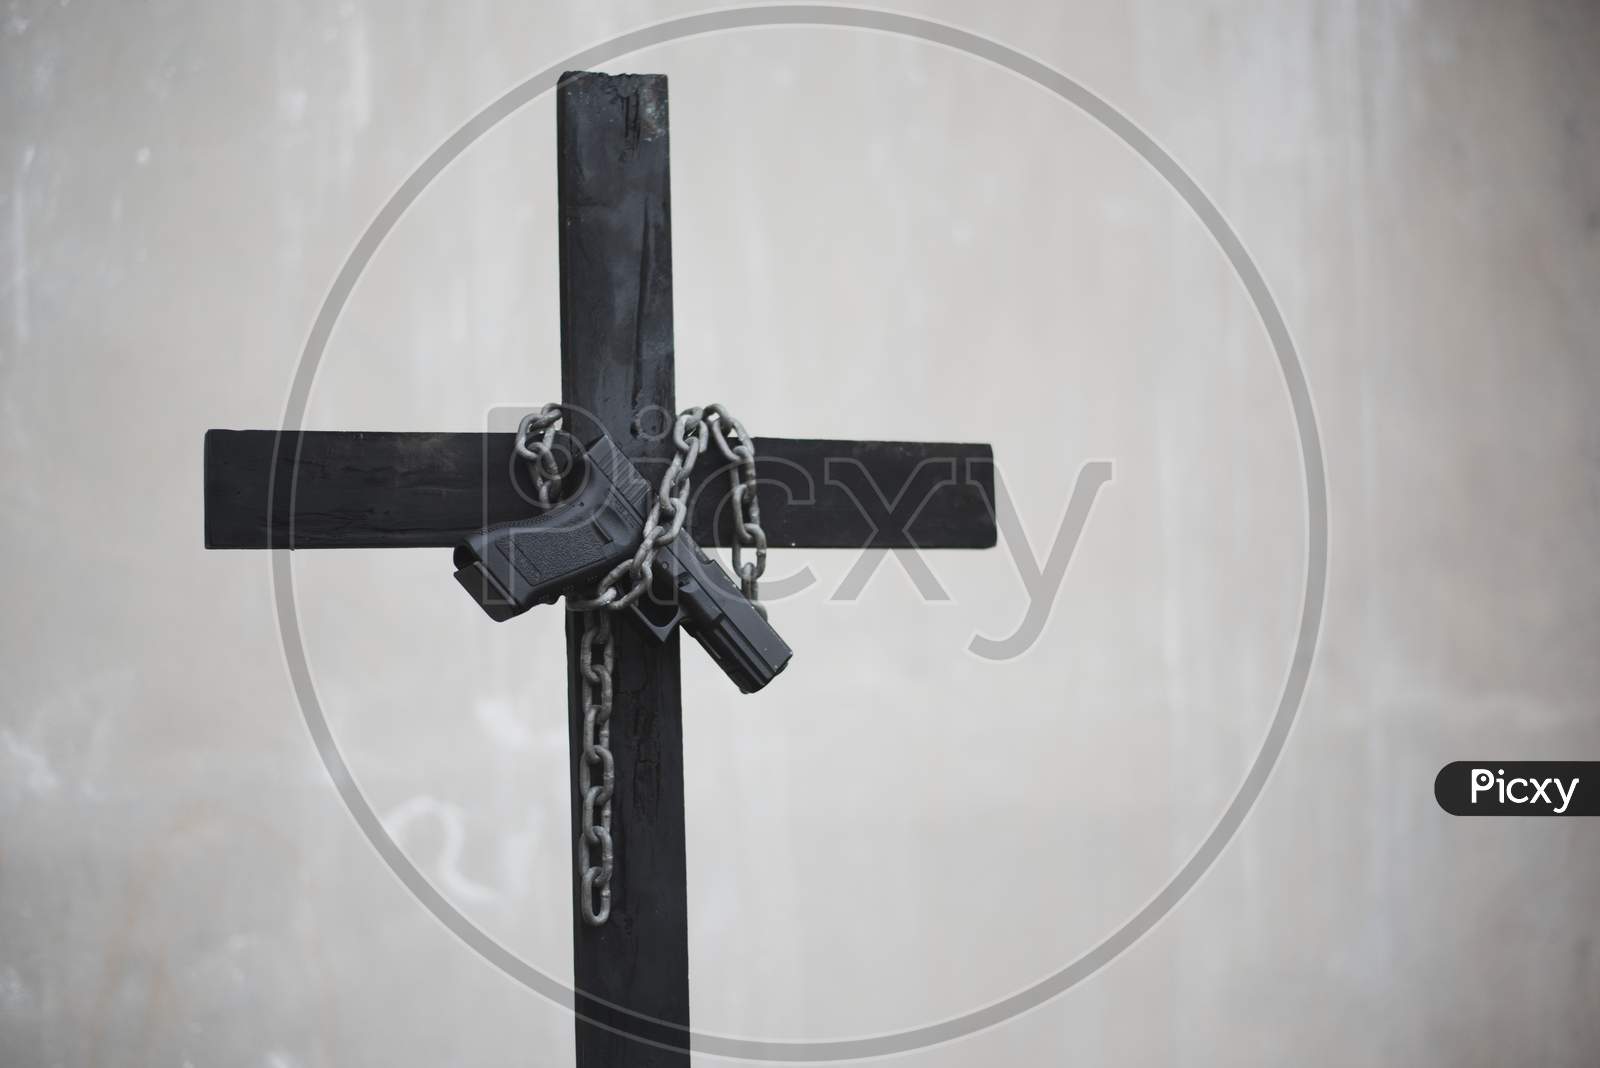 Black Cross With Chain And Handgun On White Grunge Wall. Object And Weapon Concept. Christian Religion Theme. Halloween And Criminal Theme. Copy Space On Right.